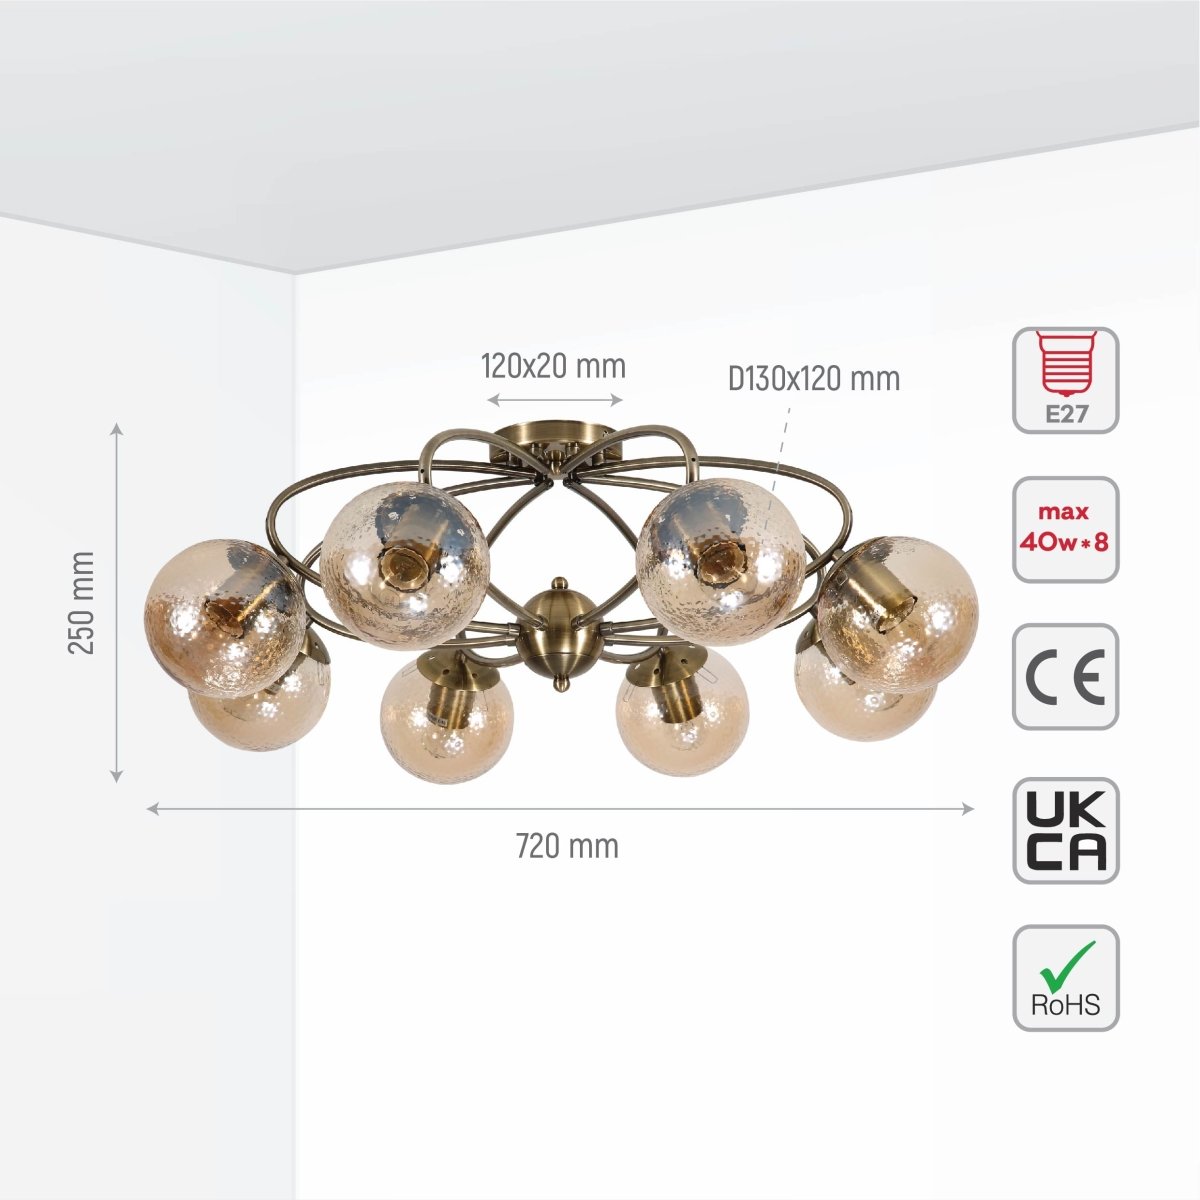 Size and specs of Textured Amber Globe Antique Brass Semi Circle Arm Semi Flush Ceiling Light | TEKLED 159-17760